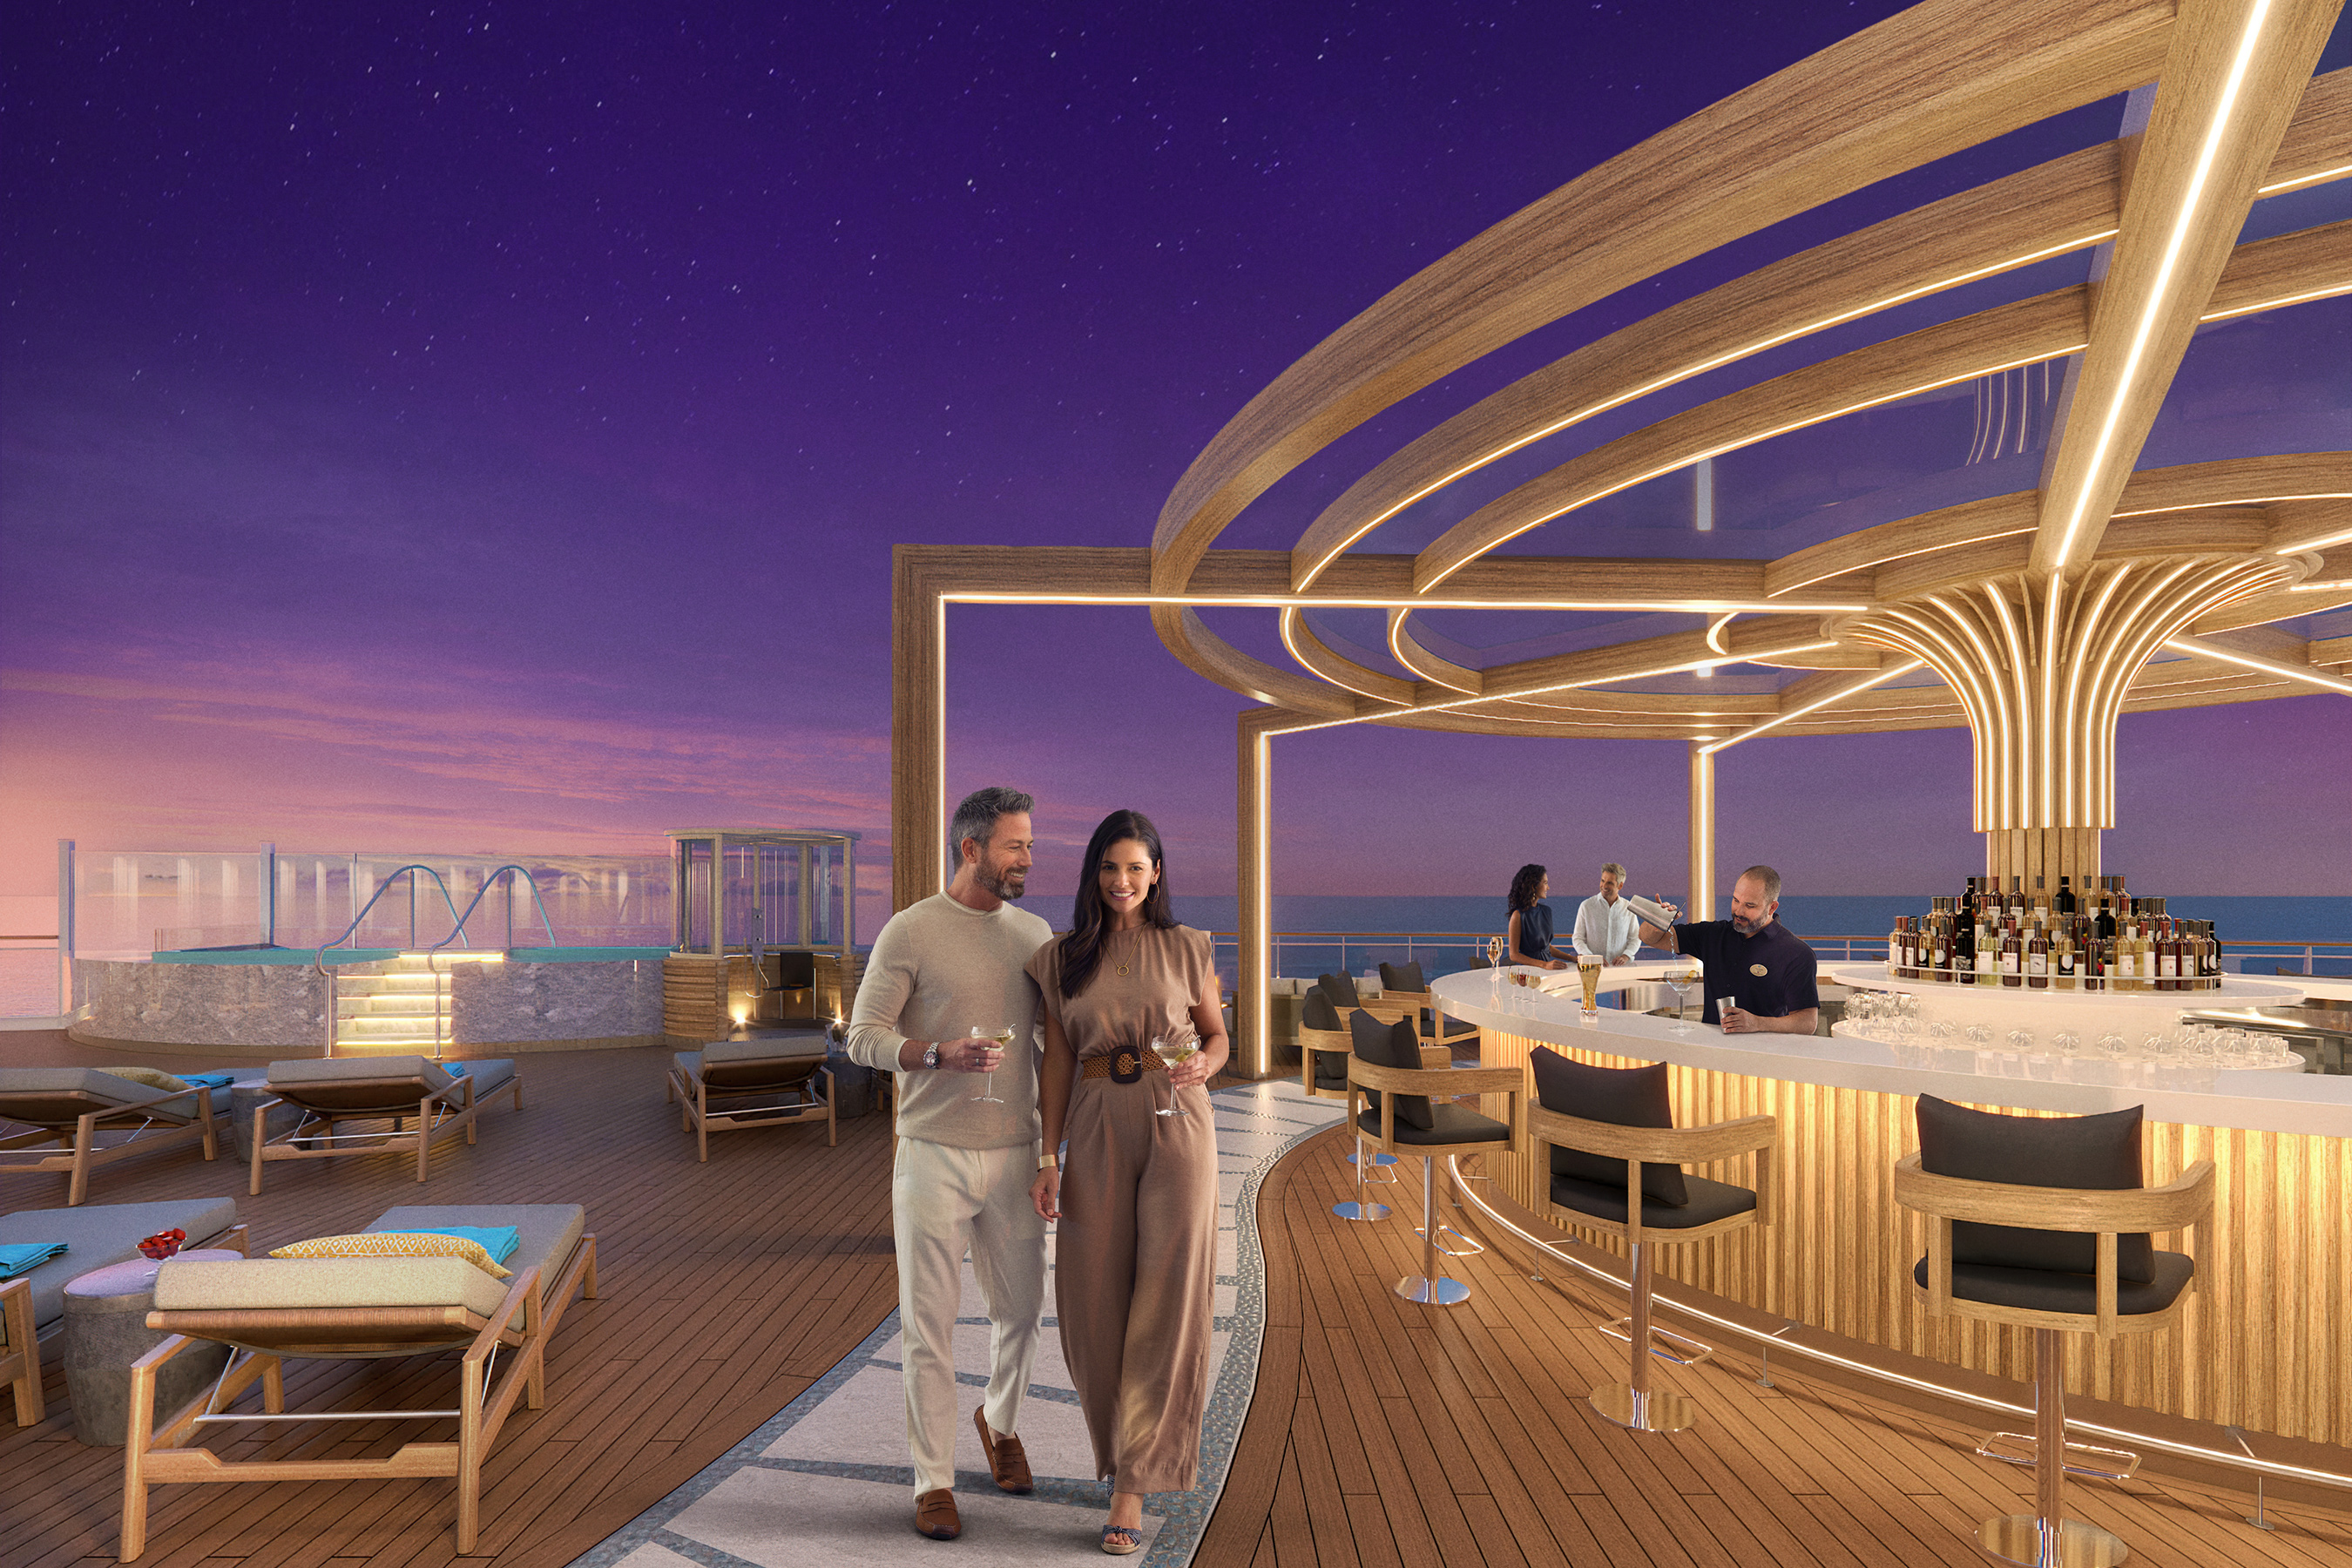 The adults-only Vibe Beach Club, located on Deck 17, will offer two infinity hot tubs and a dedicated bar. Norwegian Viva will provide guests with elevated experiences including more wide-open spaces, thoughtful and stunning design and exceptional service.